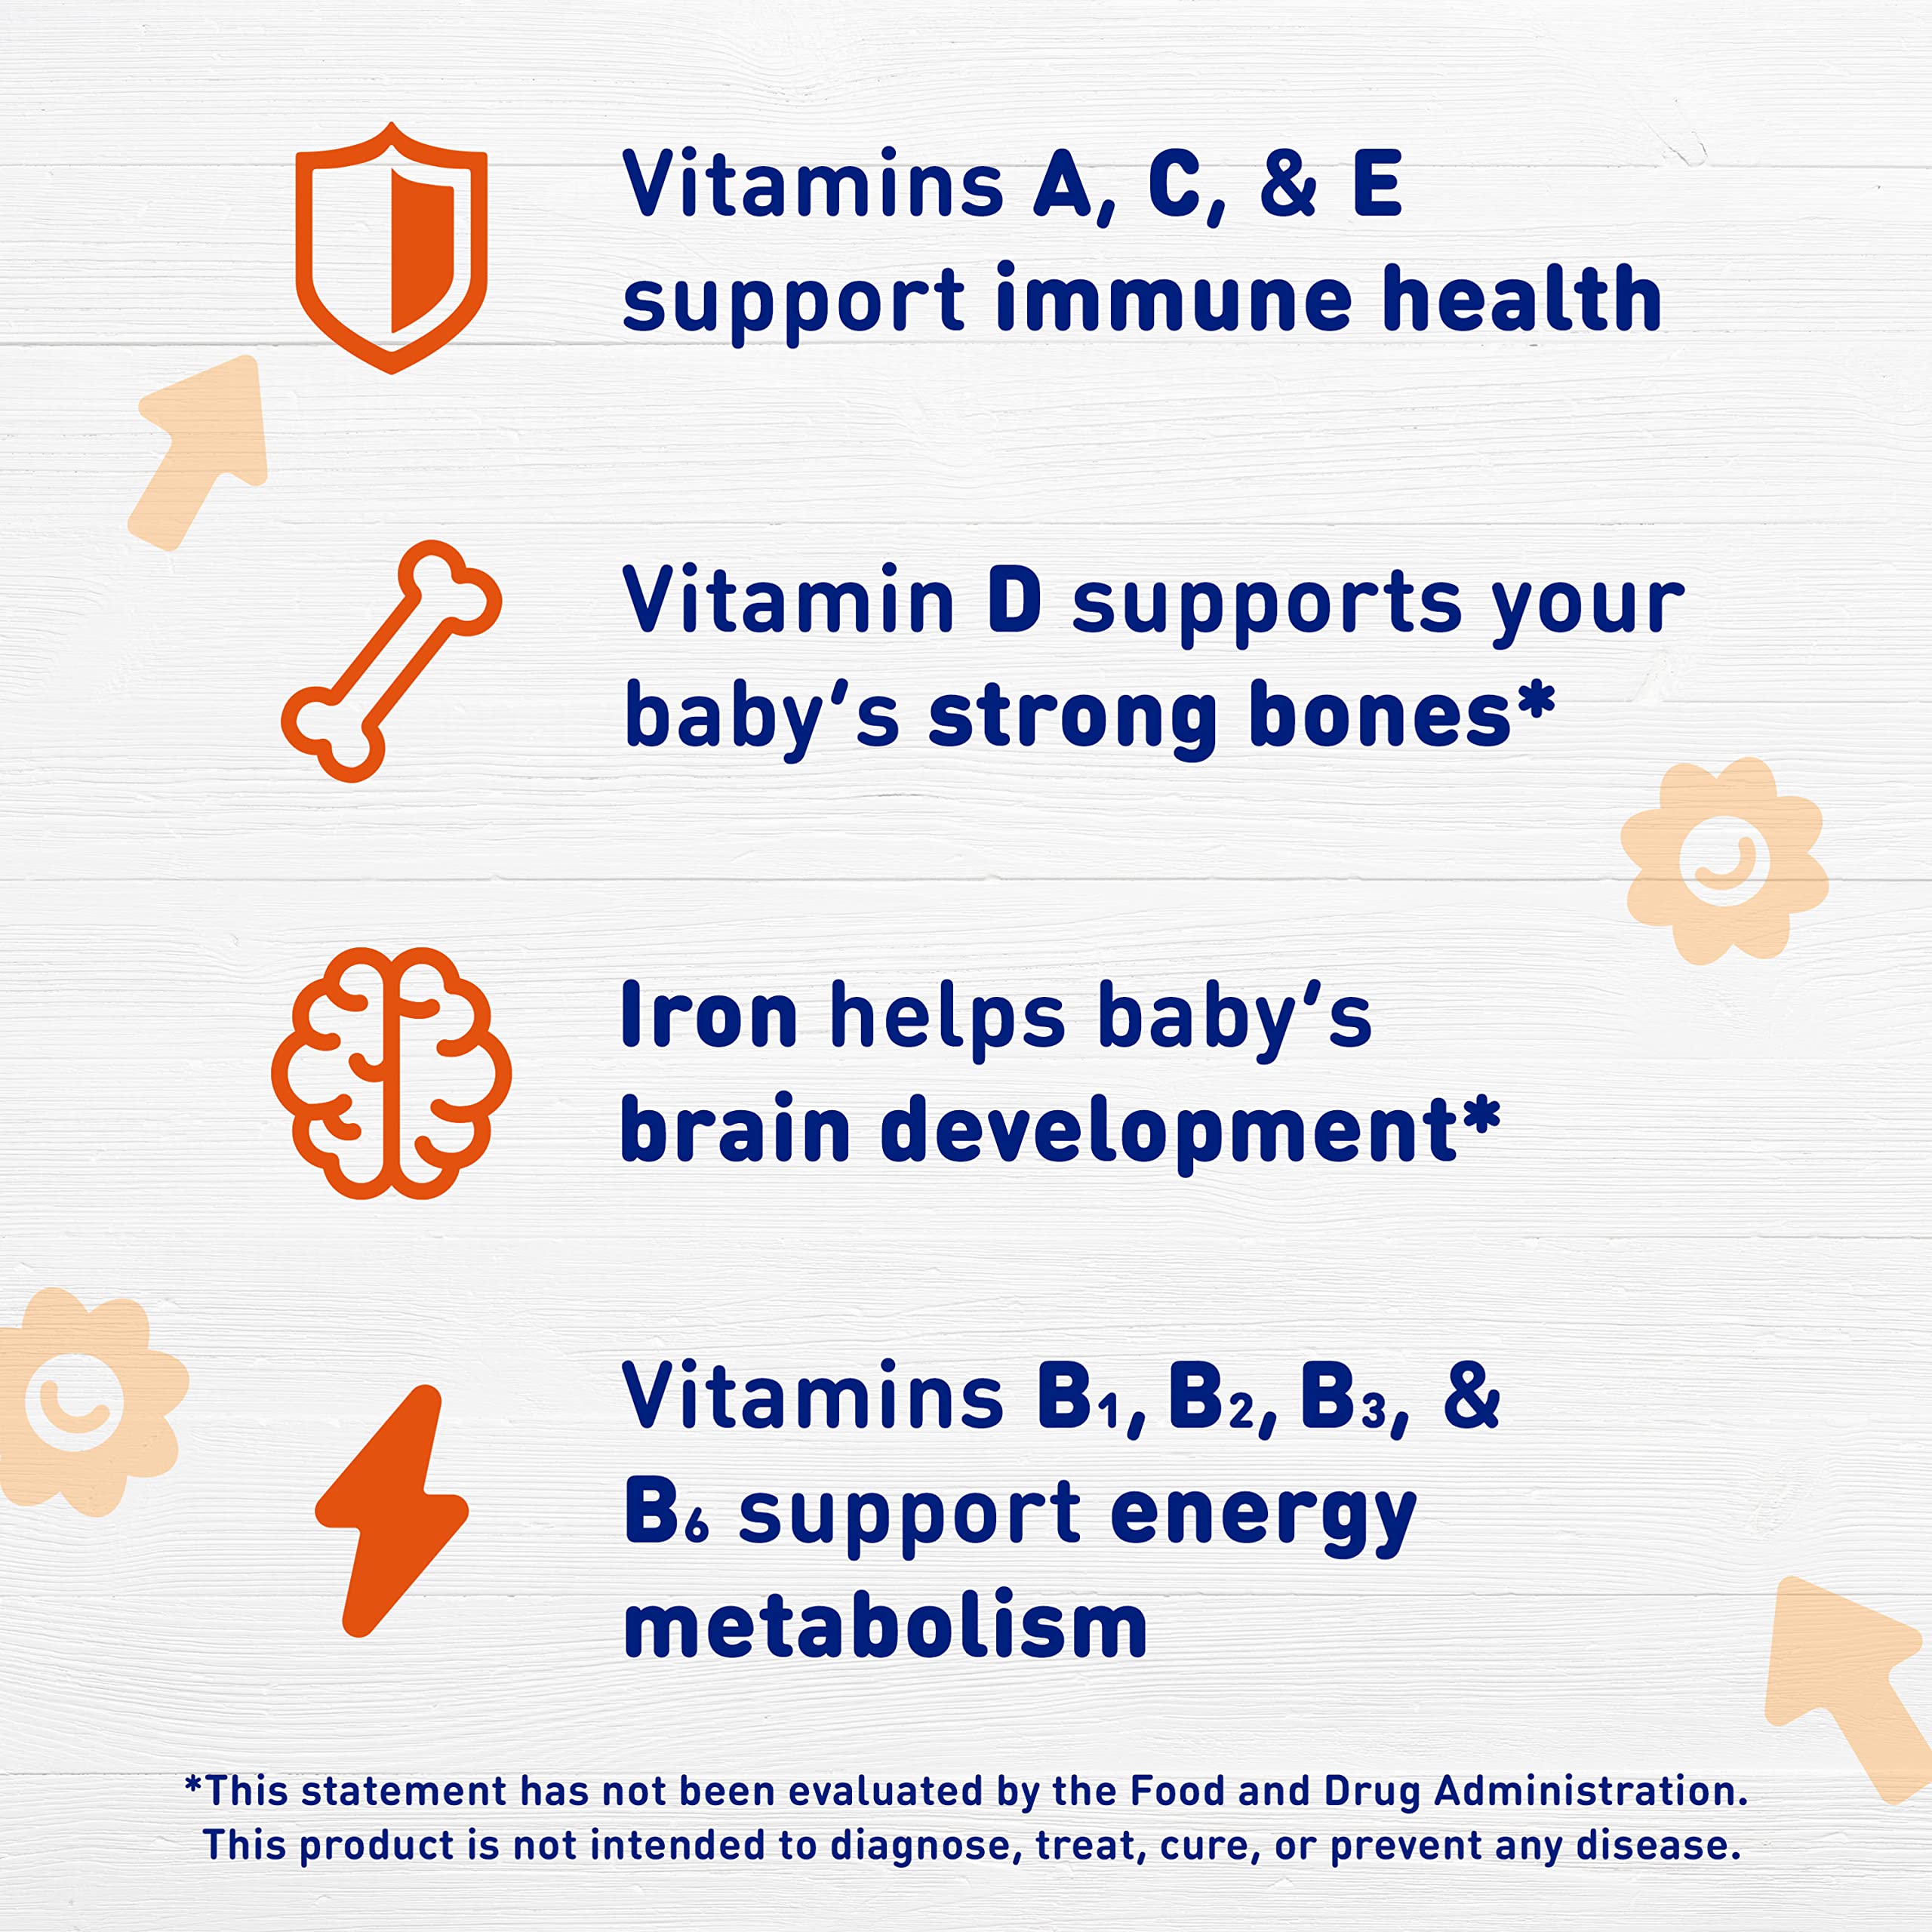 Enfamil Baby Vitamins Enfamil Poly-Vi-Sol 8 Multi-Vitamins & Iron Supplement Drops for Infants & Toddlers, Supports Growth & Development, 50 mL Dropper Bottle (Packaging May Vary)